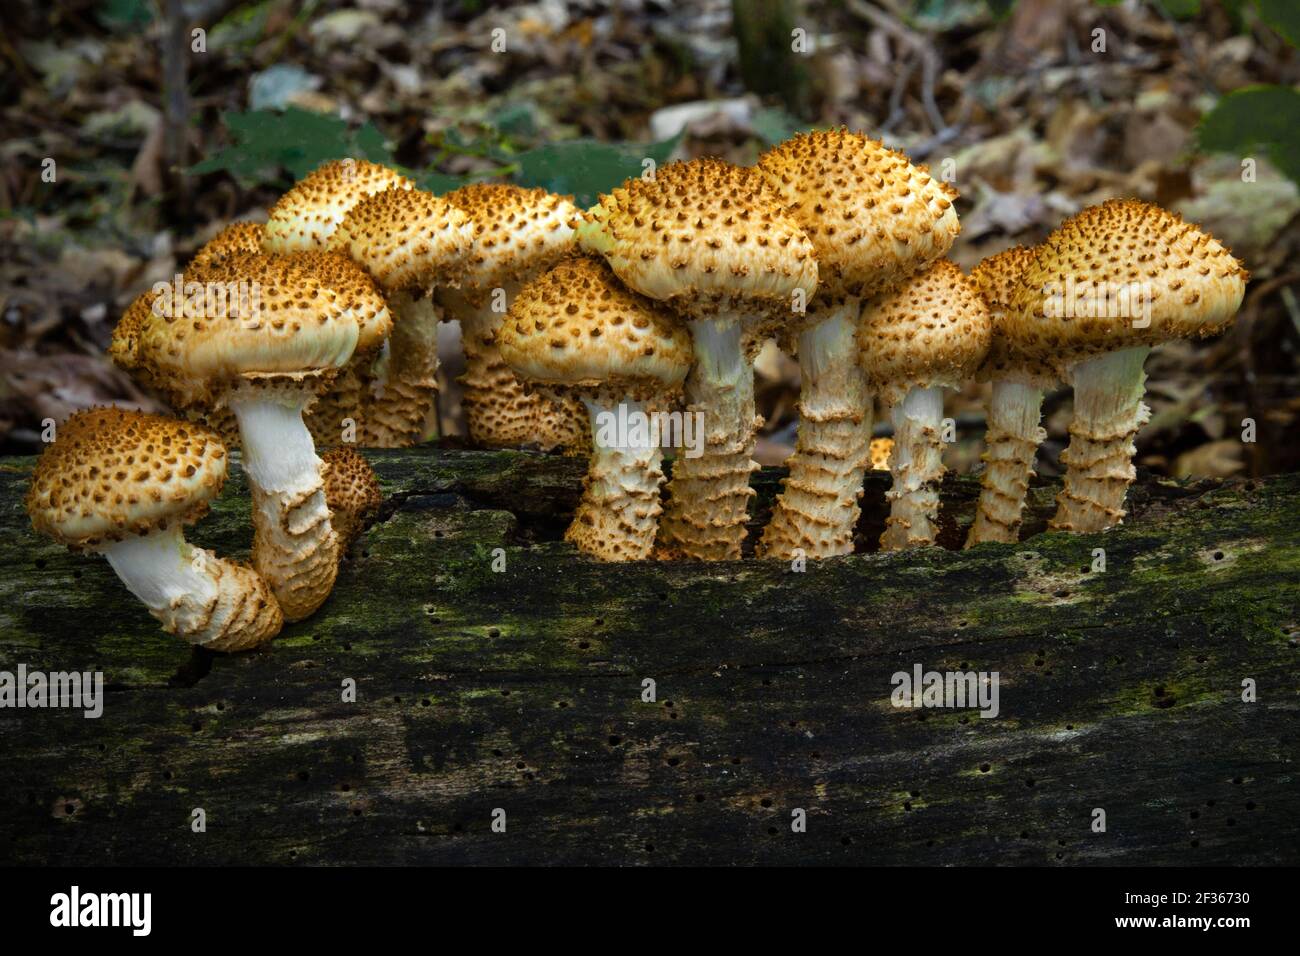 Scaly Pholiota a common saprotrophic fungus that feeds on weaken or dead wood. It is reported to be poisonous for human consumption. Stock Photo